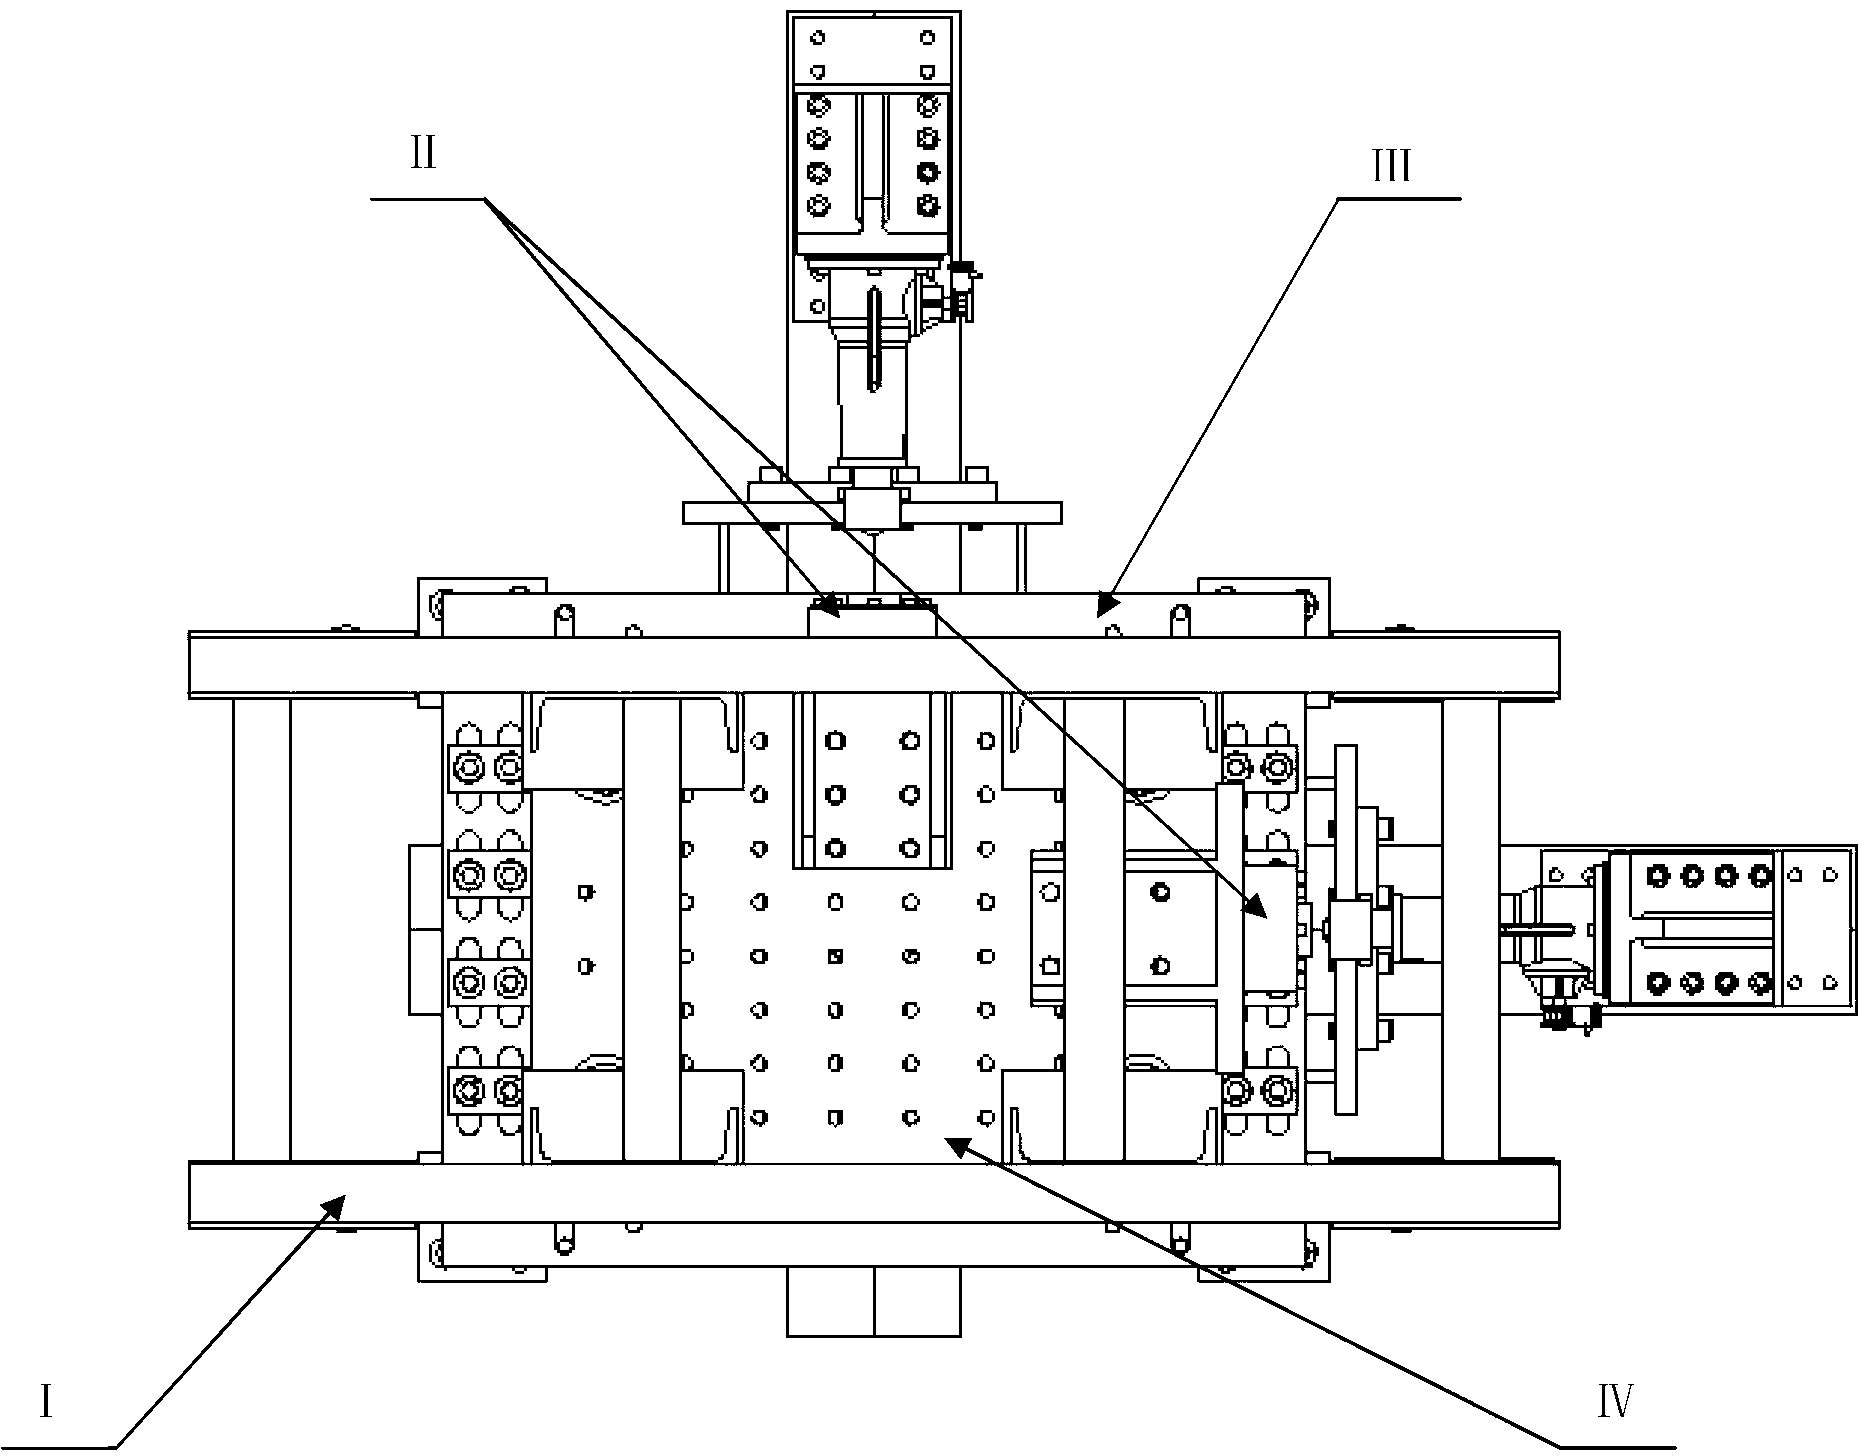 Calibration device for three-dimensional force measuring platform